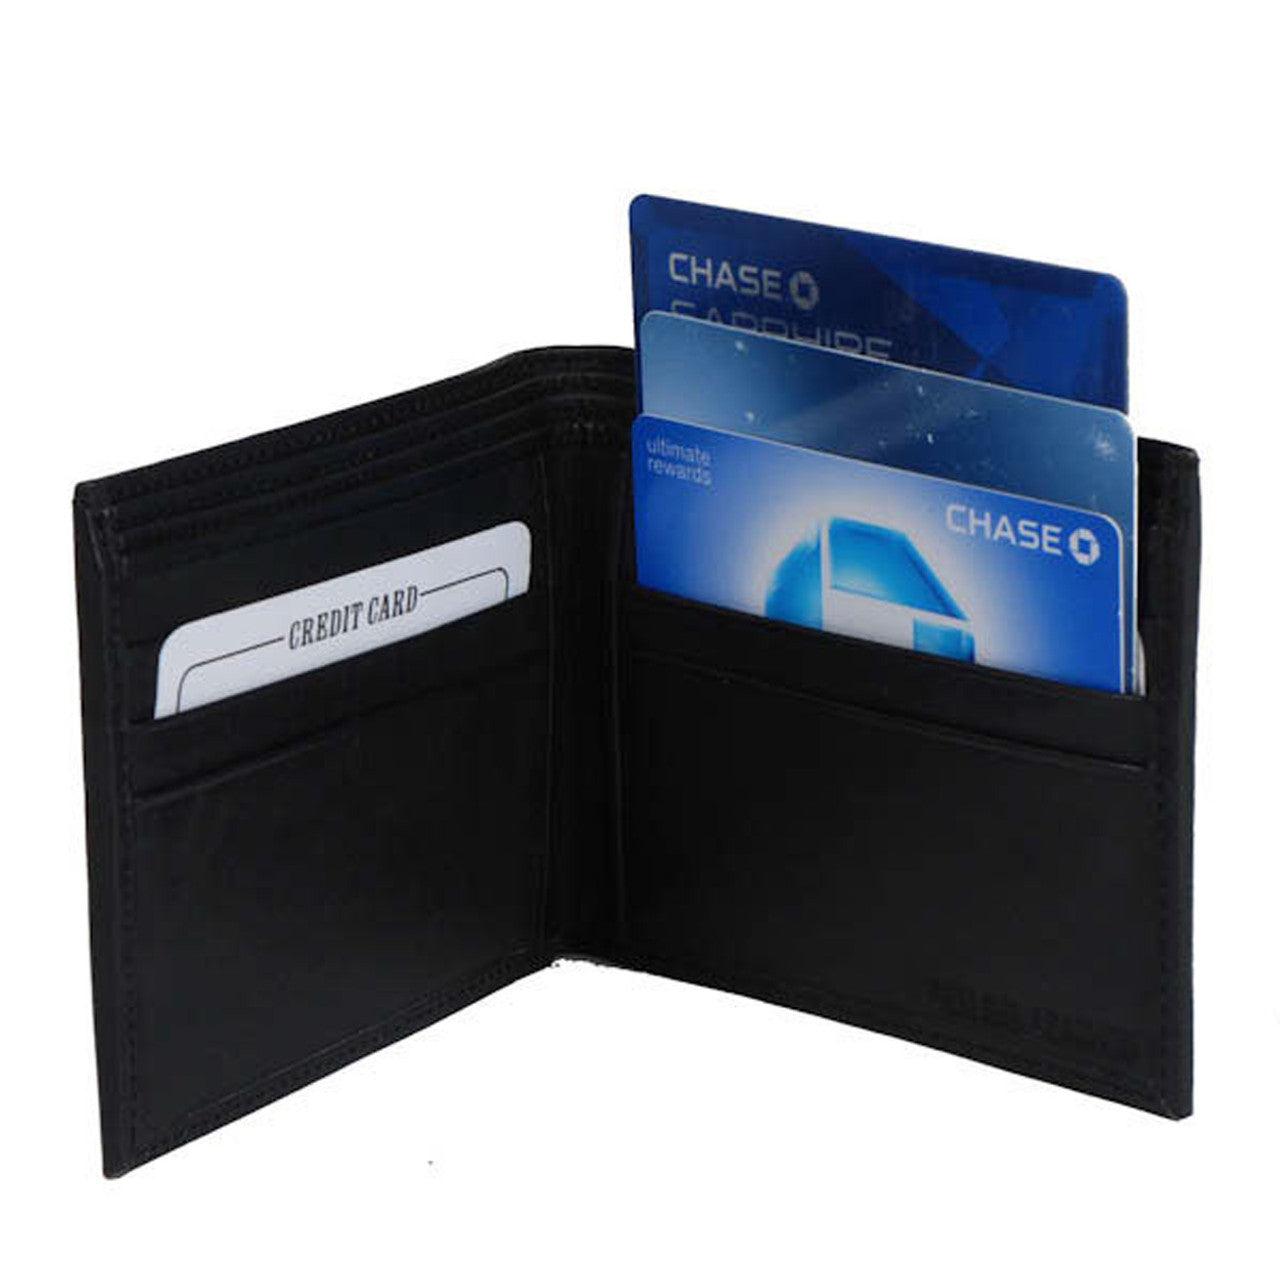 Soft Leather Wallet-Six Credit Card slots three slots for bills - The Low Vision Store